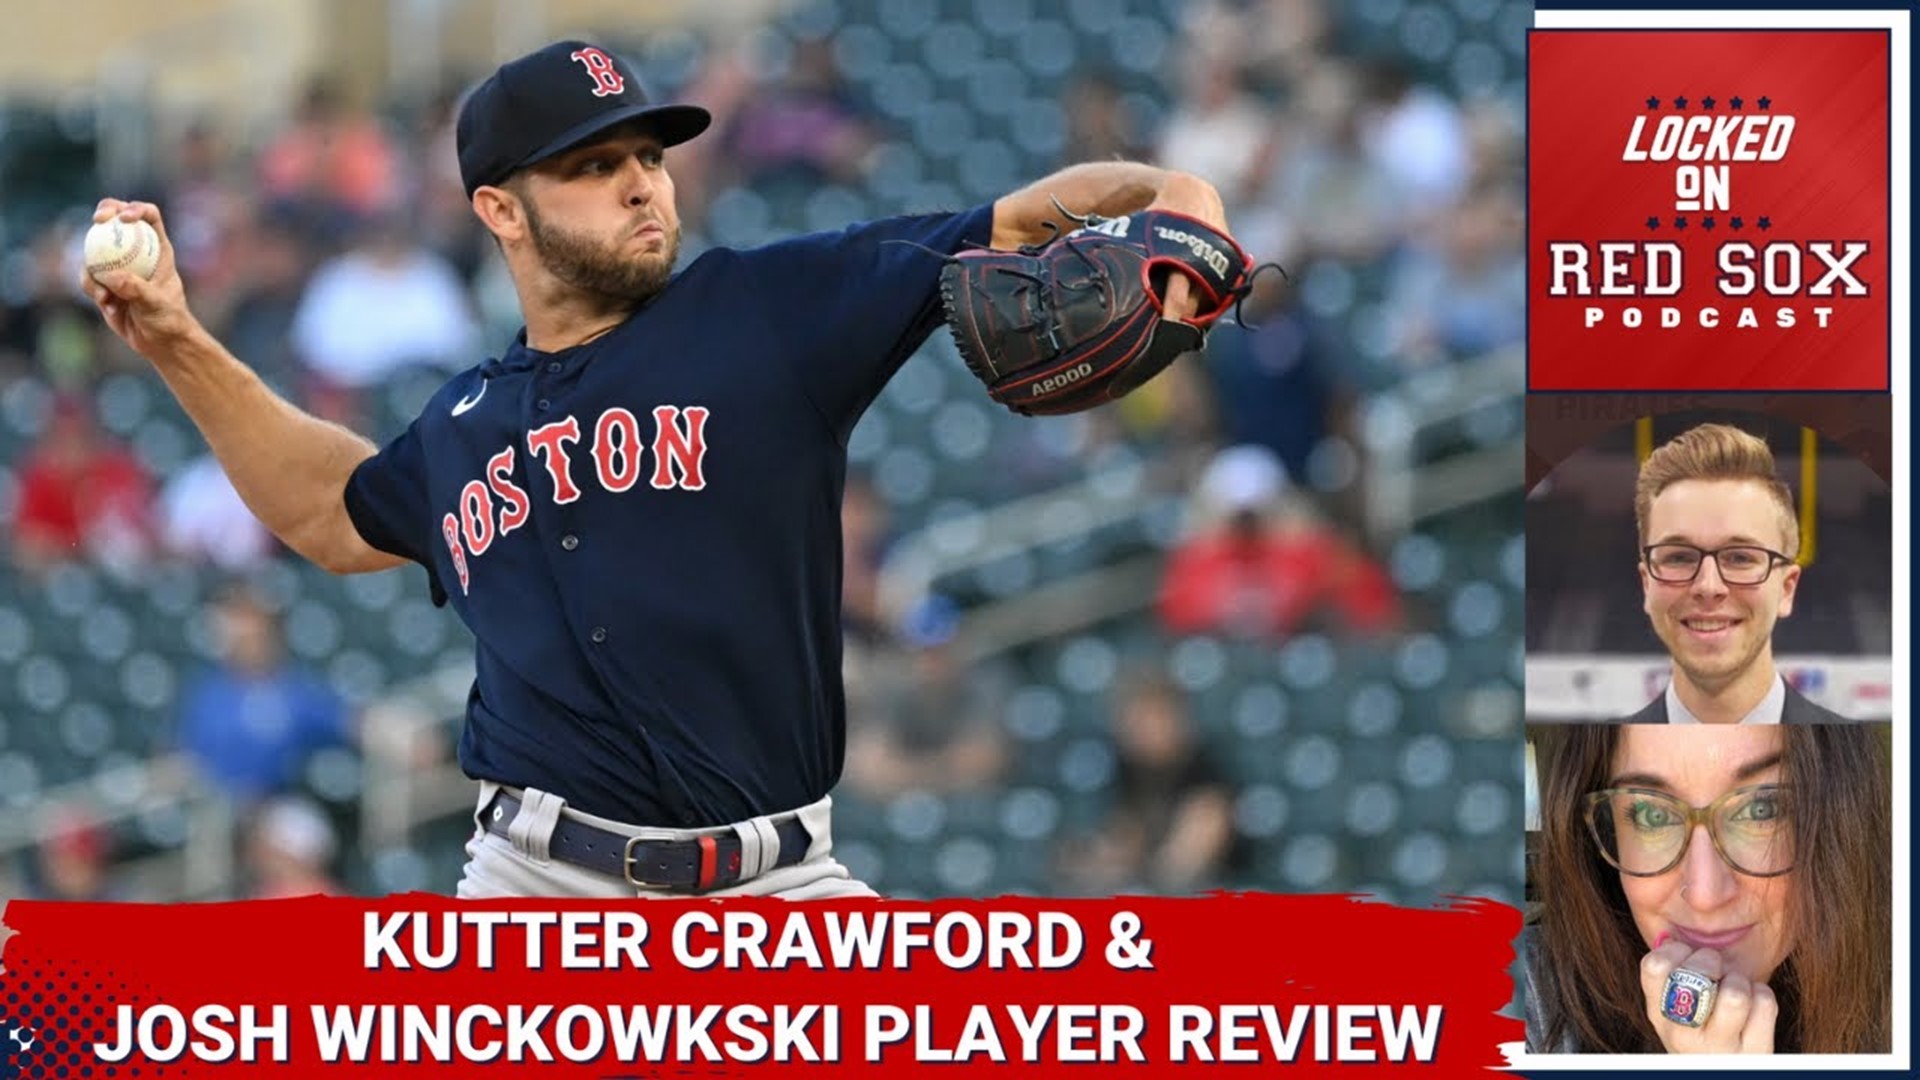 Red Sox notebook: Kutter Crawford provides Boston with a lift